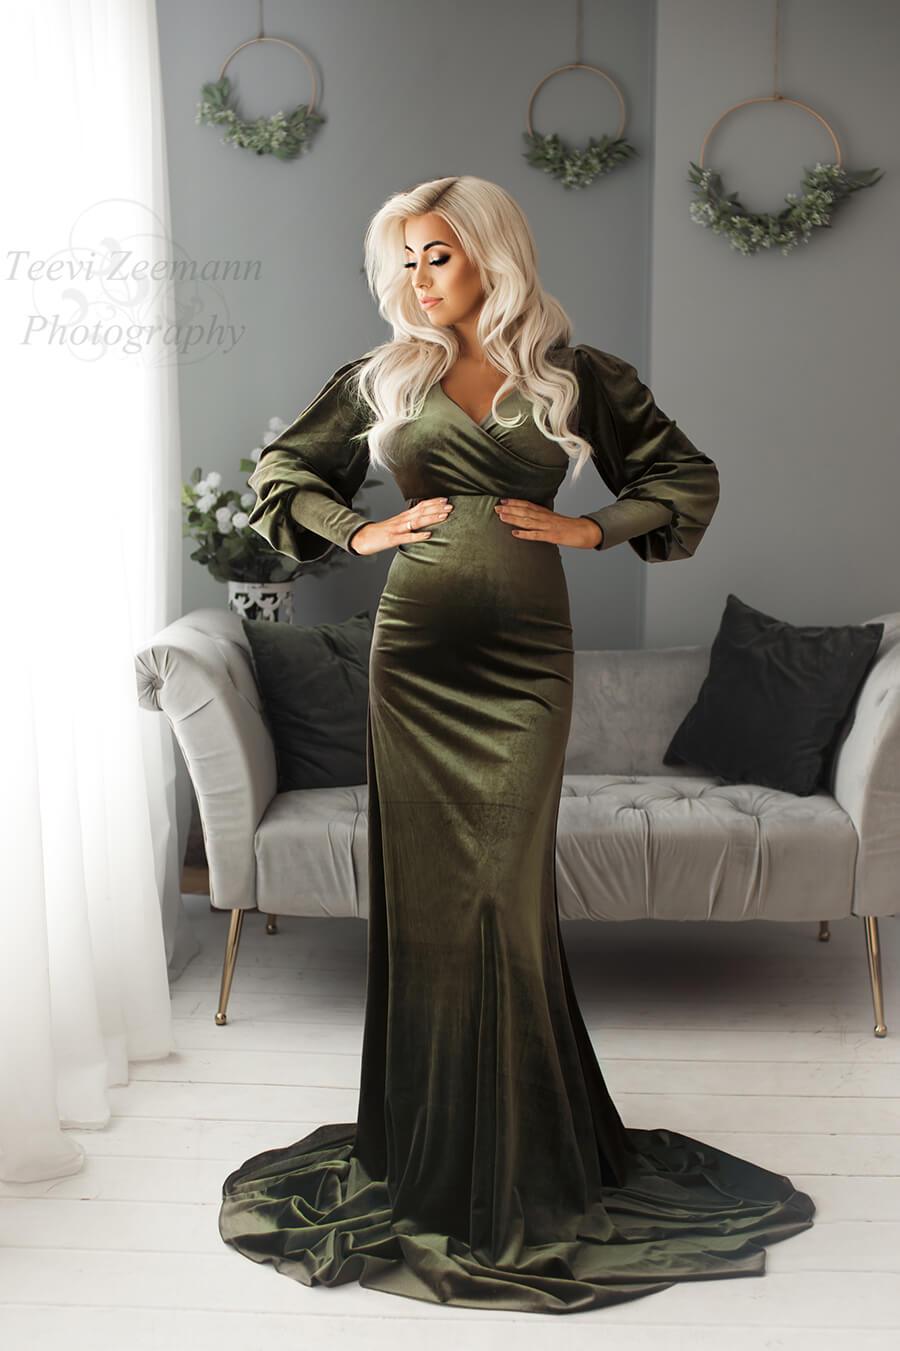 The woman is standing in a living room. She is wearing a long olive green dress with a sweetheart top. The dress is velour and the woman has long blonde hair and she is pregnant